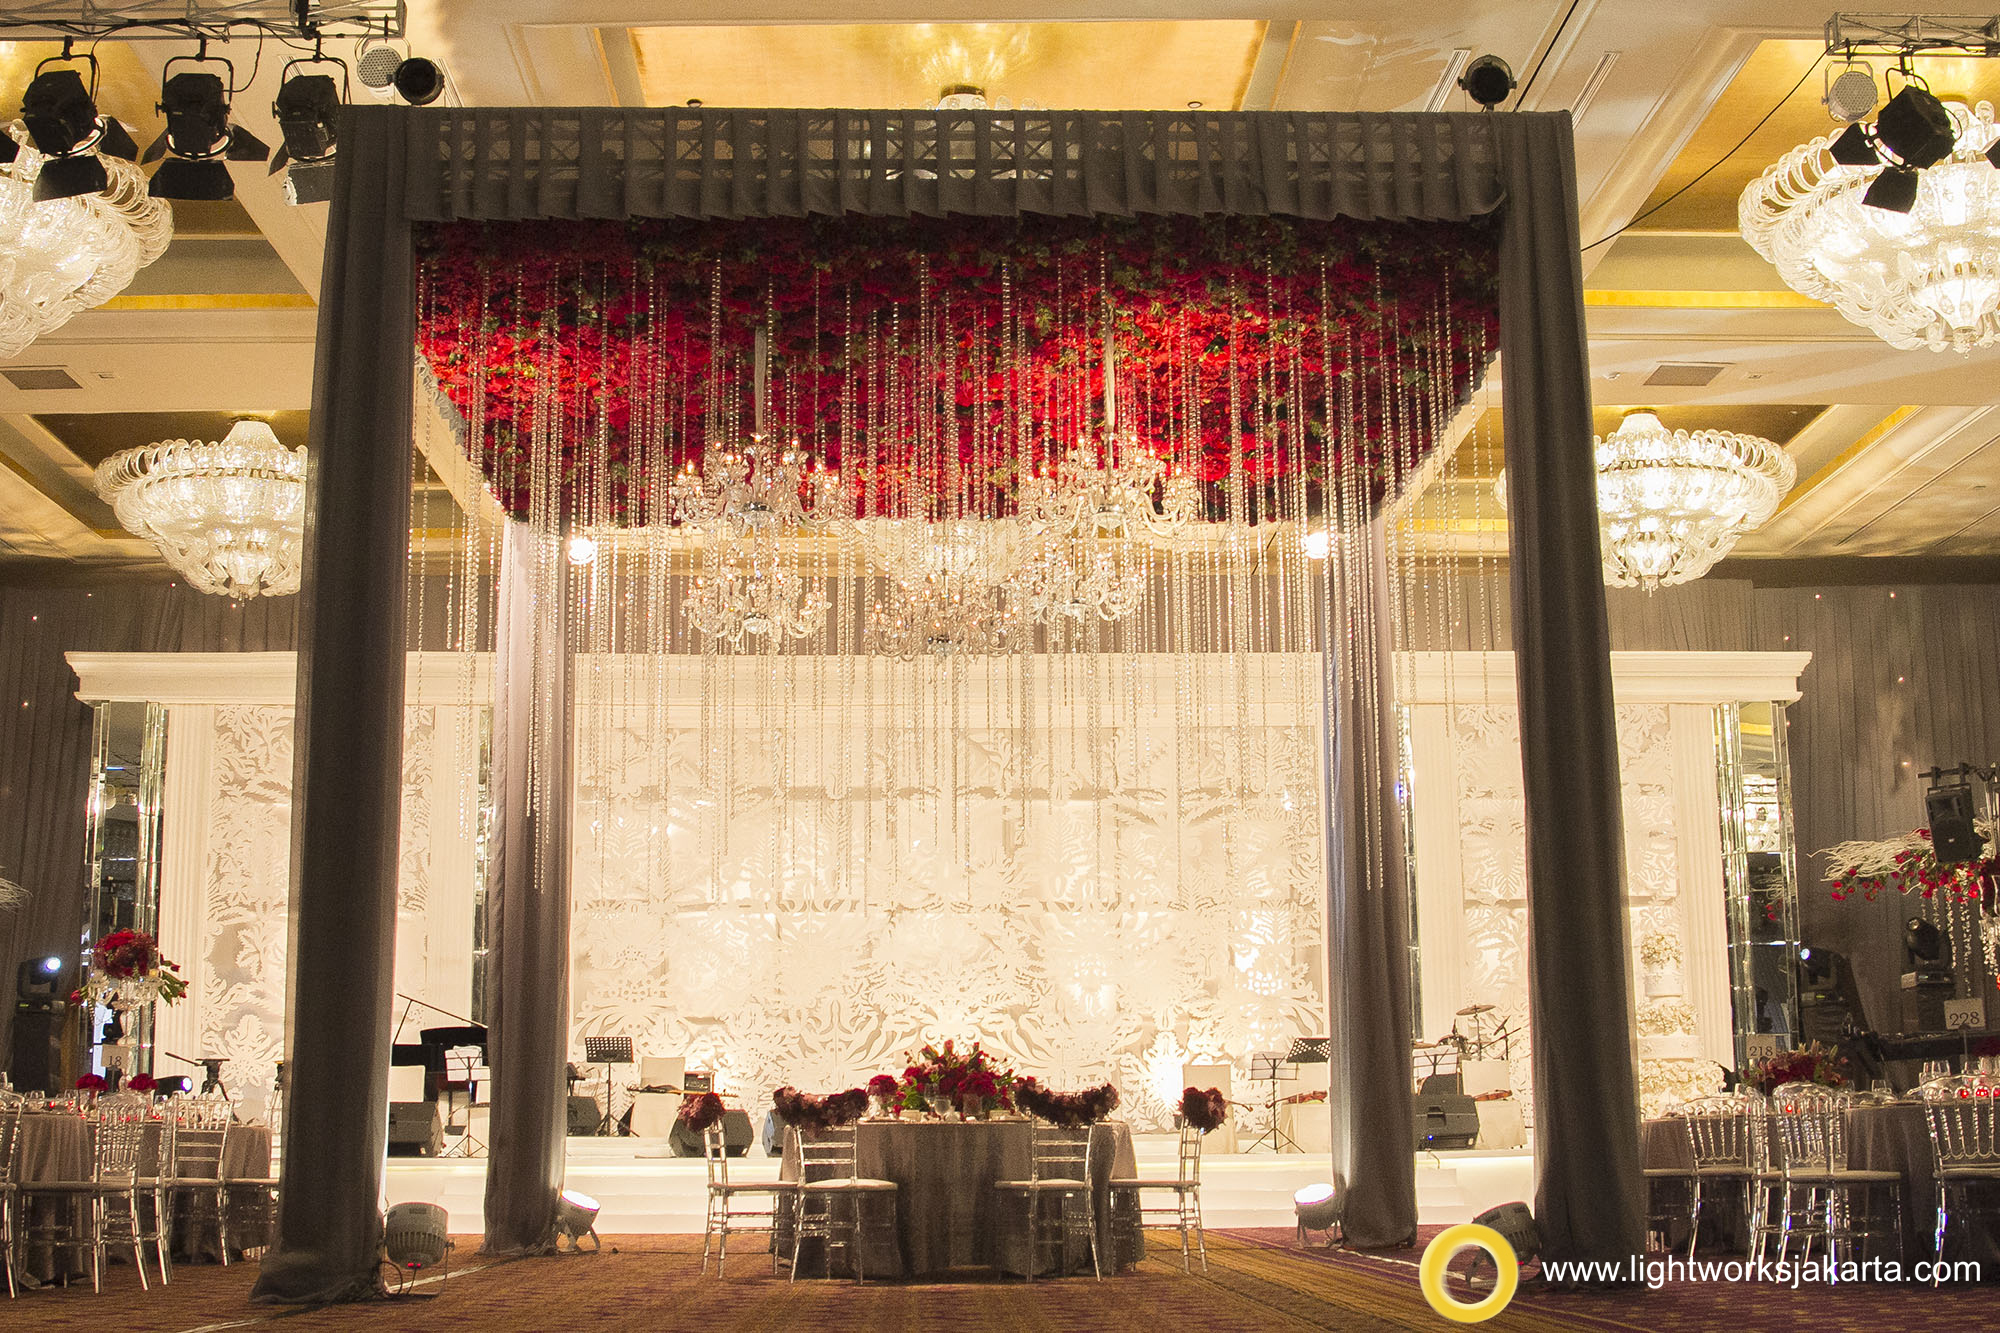 Silver Wedding Anniversary of Martias and Silvia; Venue at Mulia Hotel; Organized by Multi Kreasi Enterprise (MKE); Decoration by Nefi Decor; Lighting by Lightworks